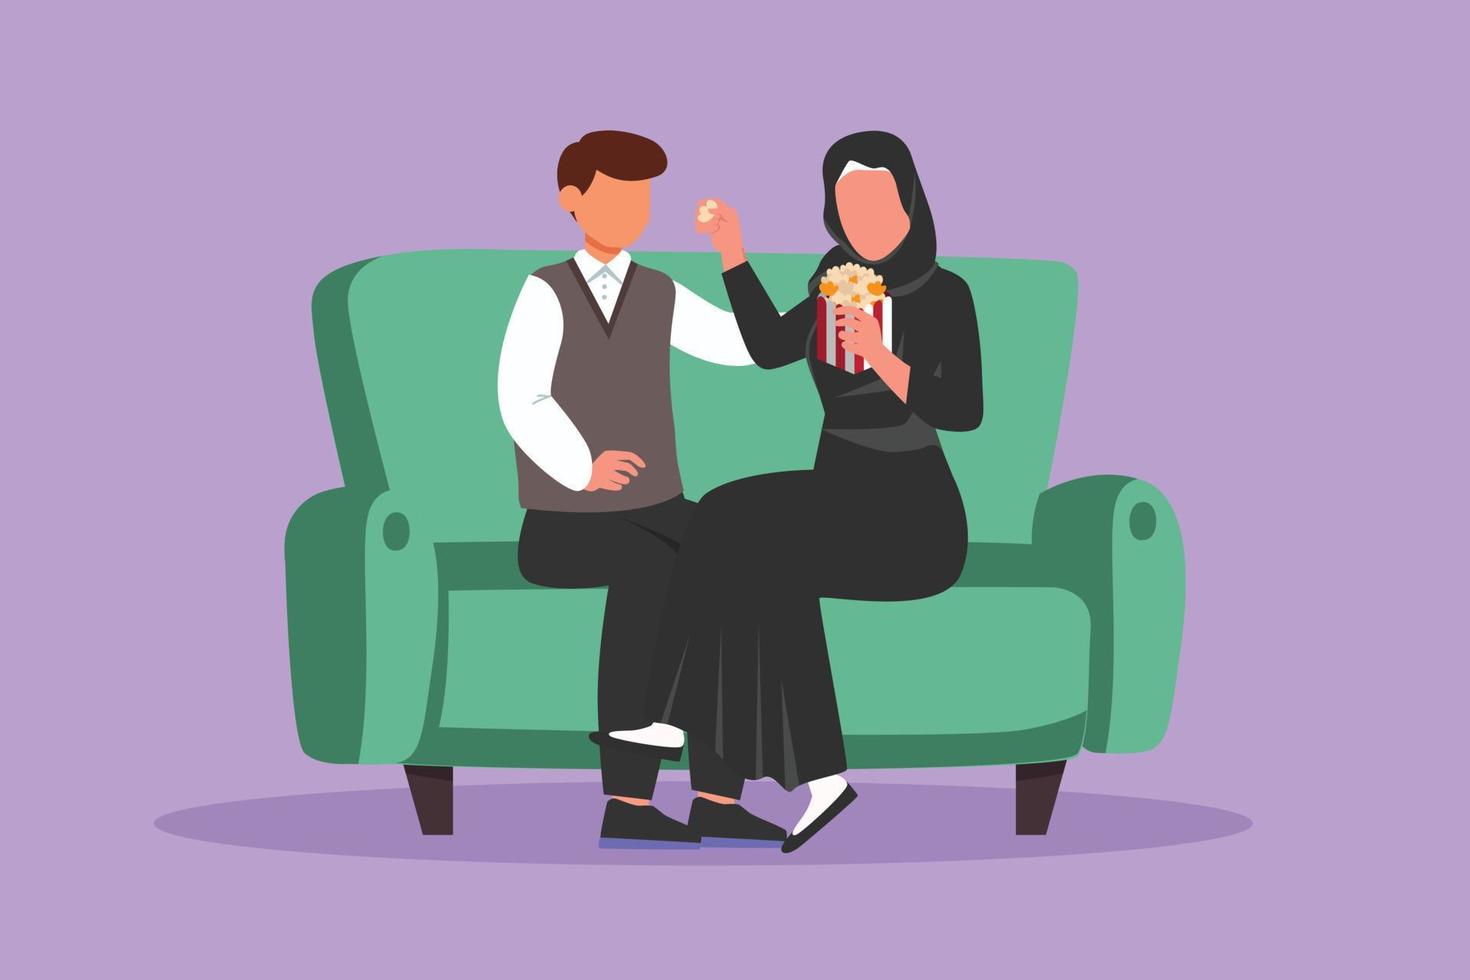 Graphic flat design drawing romantic young Arab couple sitting relaxed together on sofa, woman feeding popcorn to man. Celebrate wedding anniversary in living room. Cartoon style vector illustration